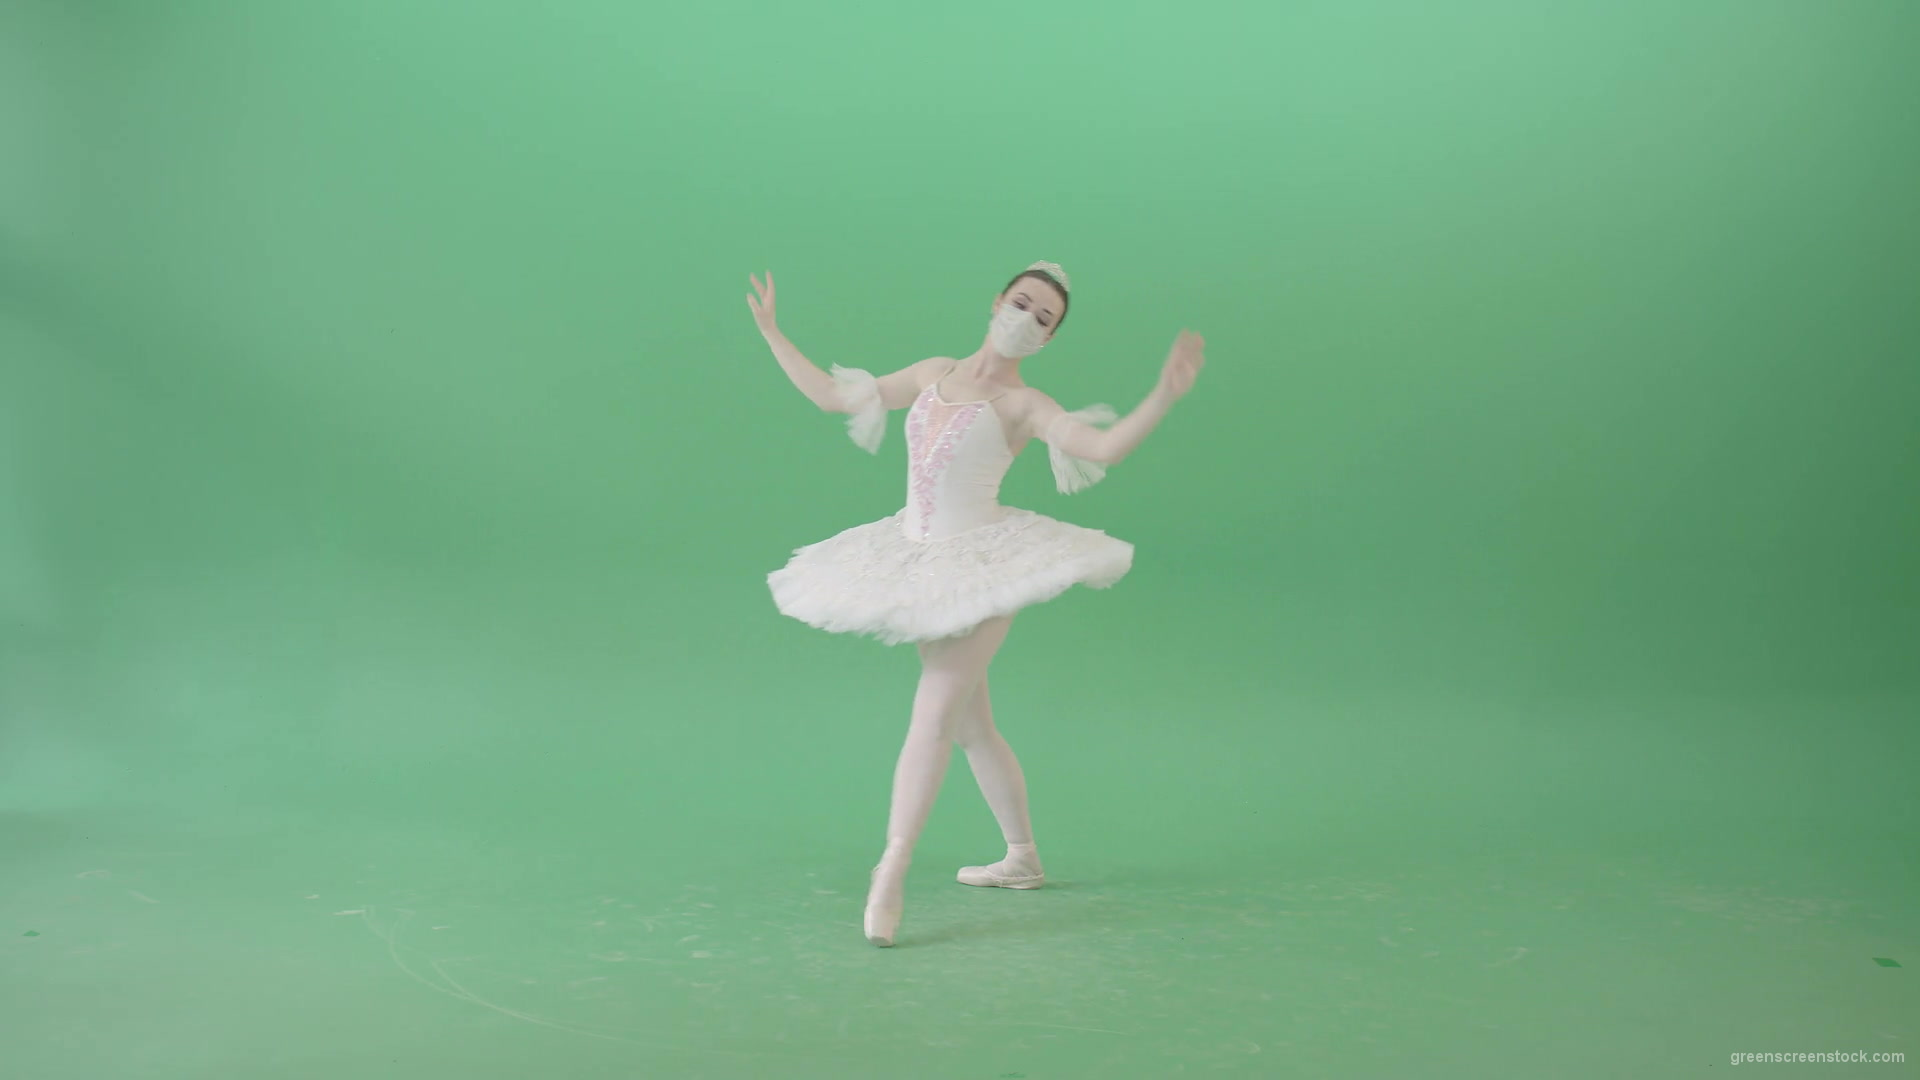 Amazing-Flowing-dance-by-Ballerina-ballet-girl-looking-for-Corona-Virus-isolated-on-Green-Screen-Viral-4K-Video-Footage-1920_008 Green Screen Stock